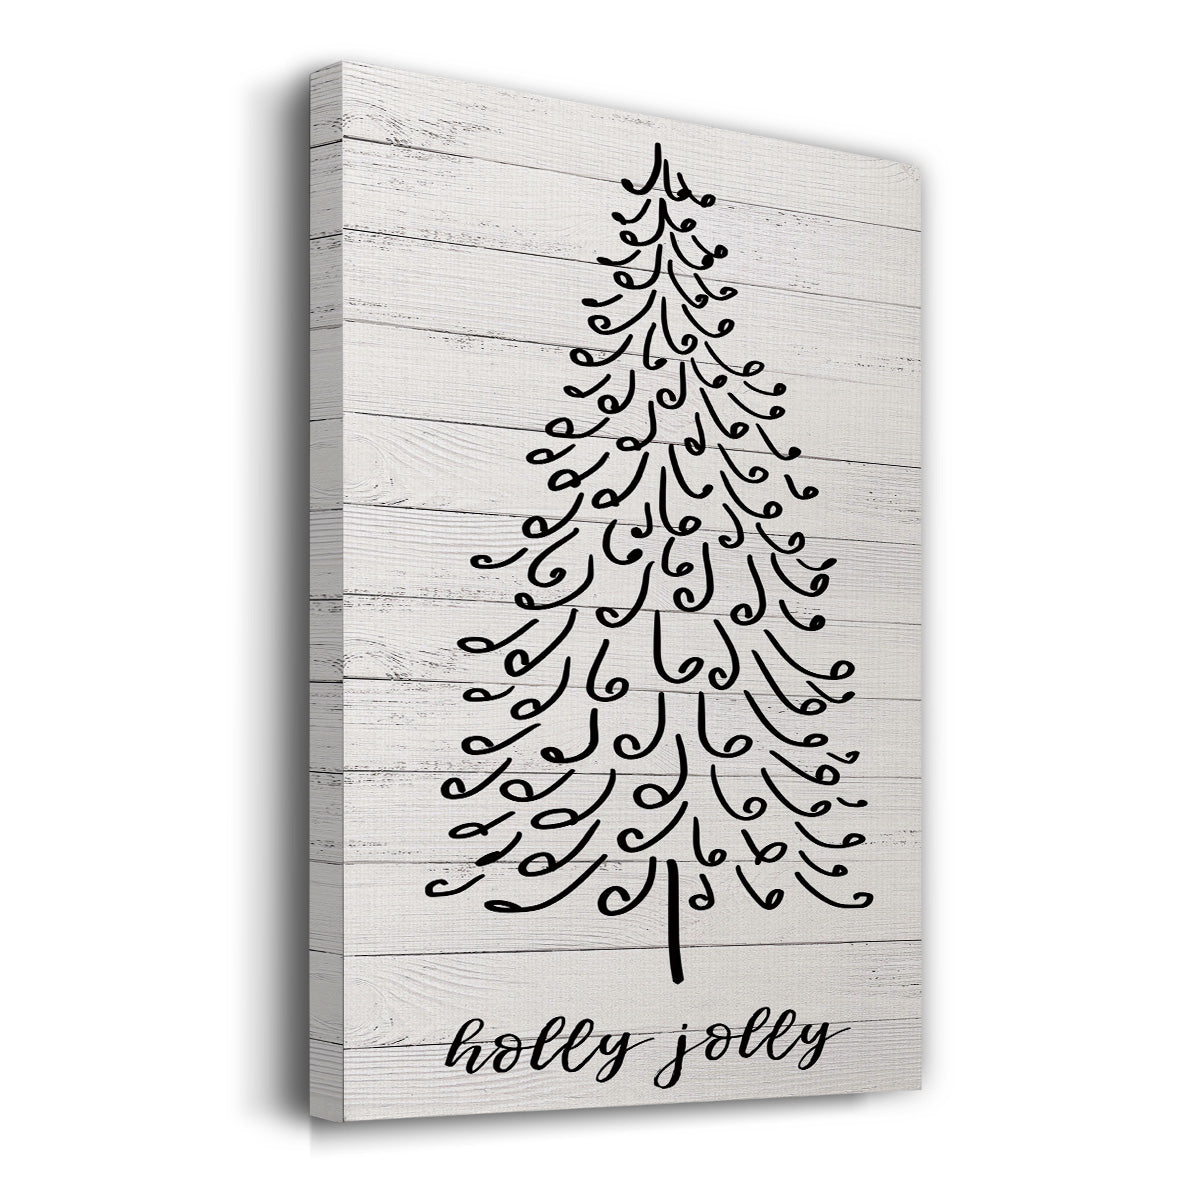 Holly Jolly - Gallery Wrapped Canvas